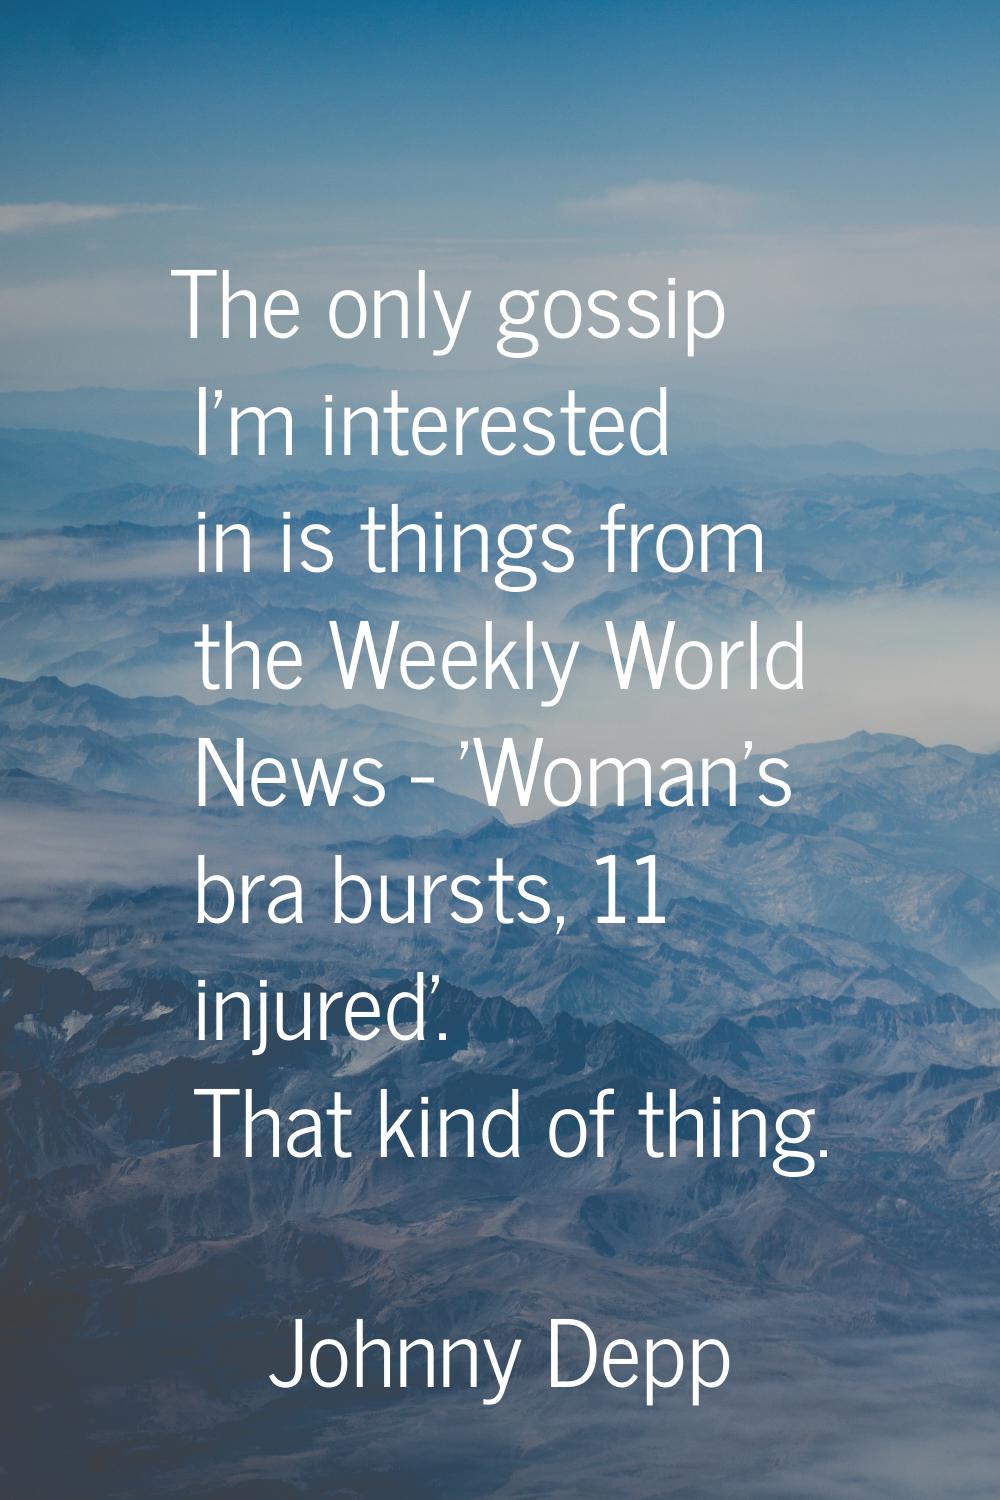 The only gossip I'm interested in is things from the Weekly World News - 'Woman's bra bursts, 11 in